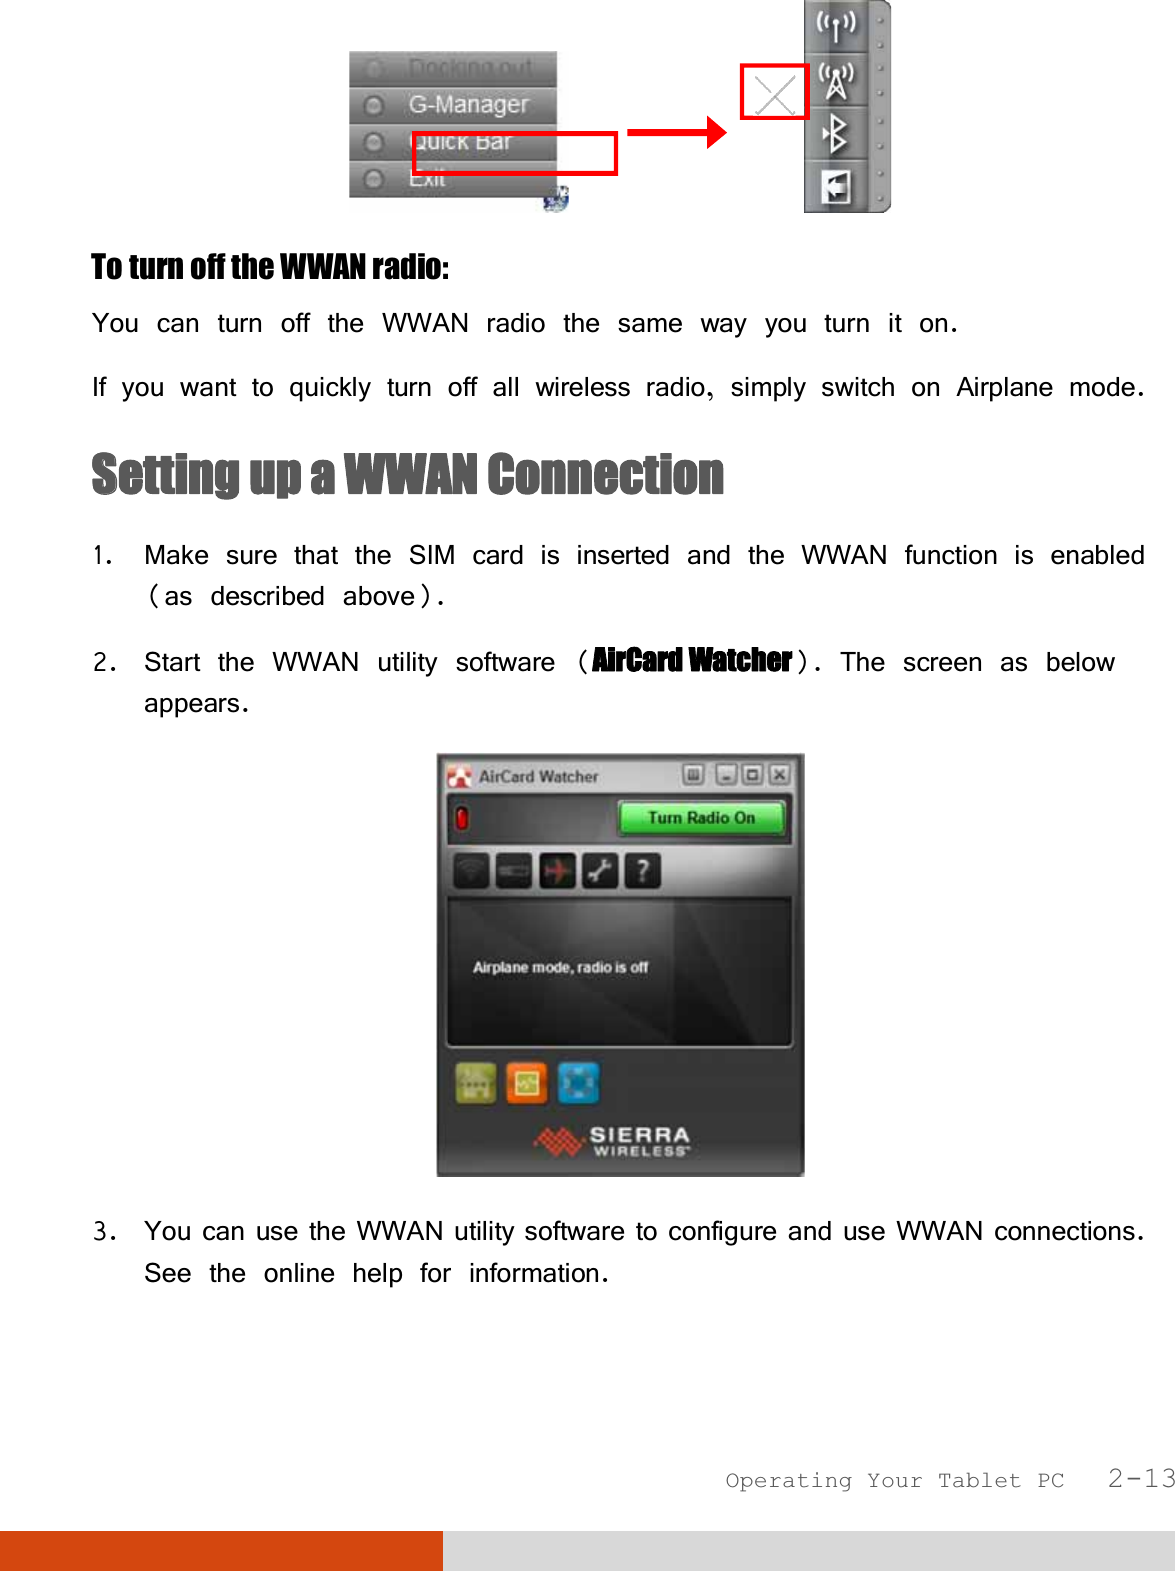  Operating Your Tablet PC   2-13                To turn off the WWAN radio: You can turn off the WWAN radio the same way you turn it on.  If you want to quickly turn off all wireless radio, simply switch on Airplane mode. SSetting up a WWAN Connection 1. Make sure that the SIM card is inserted and the WWAN function is enabled (as described above). 2. Start the WWAN utility software (AirCard Watcher). The screen as below appears.  3. You can use the WWAN utility software to configure and use WWAN connections. See the online help for information.  